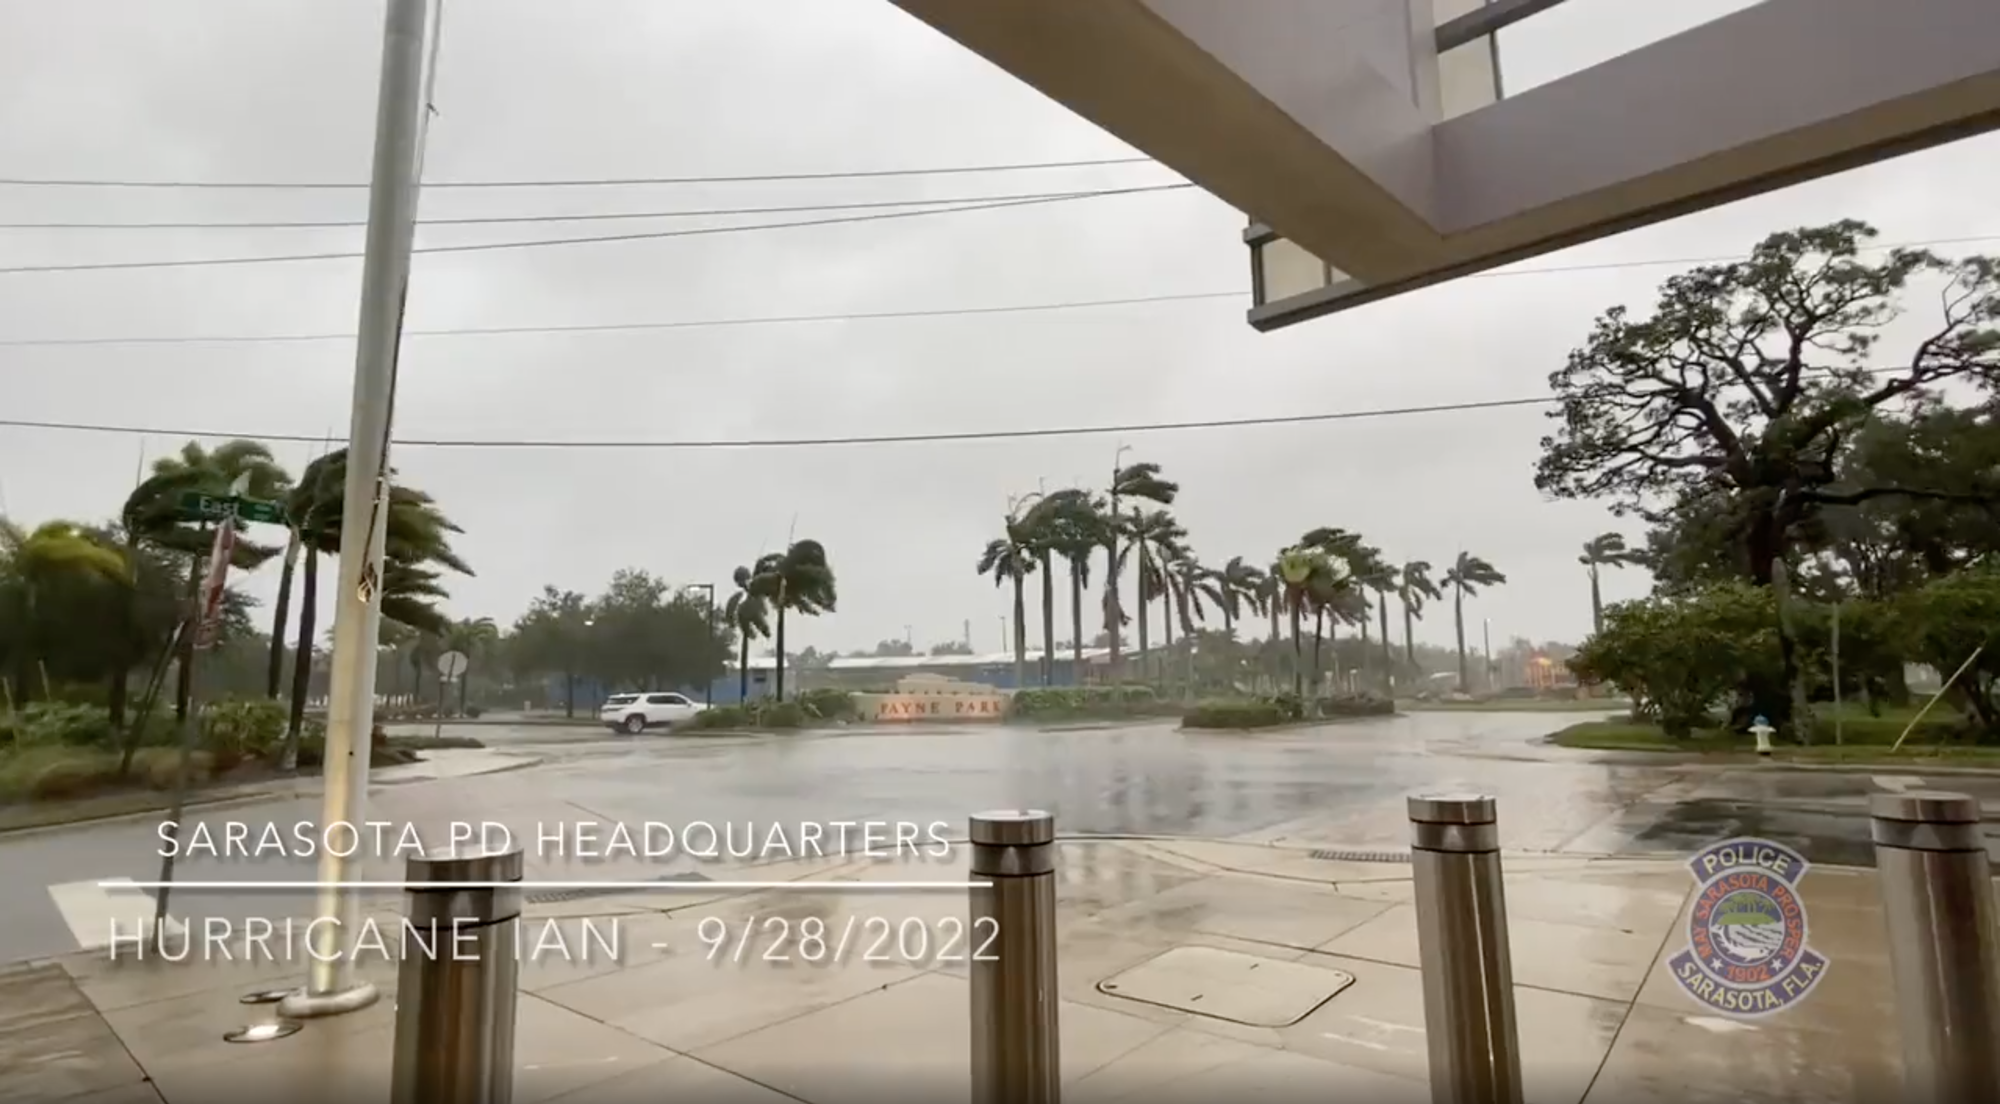 From a video the Sarasota Police Department shared of outside its headquarters at 5:45 p.m. Wednesday.